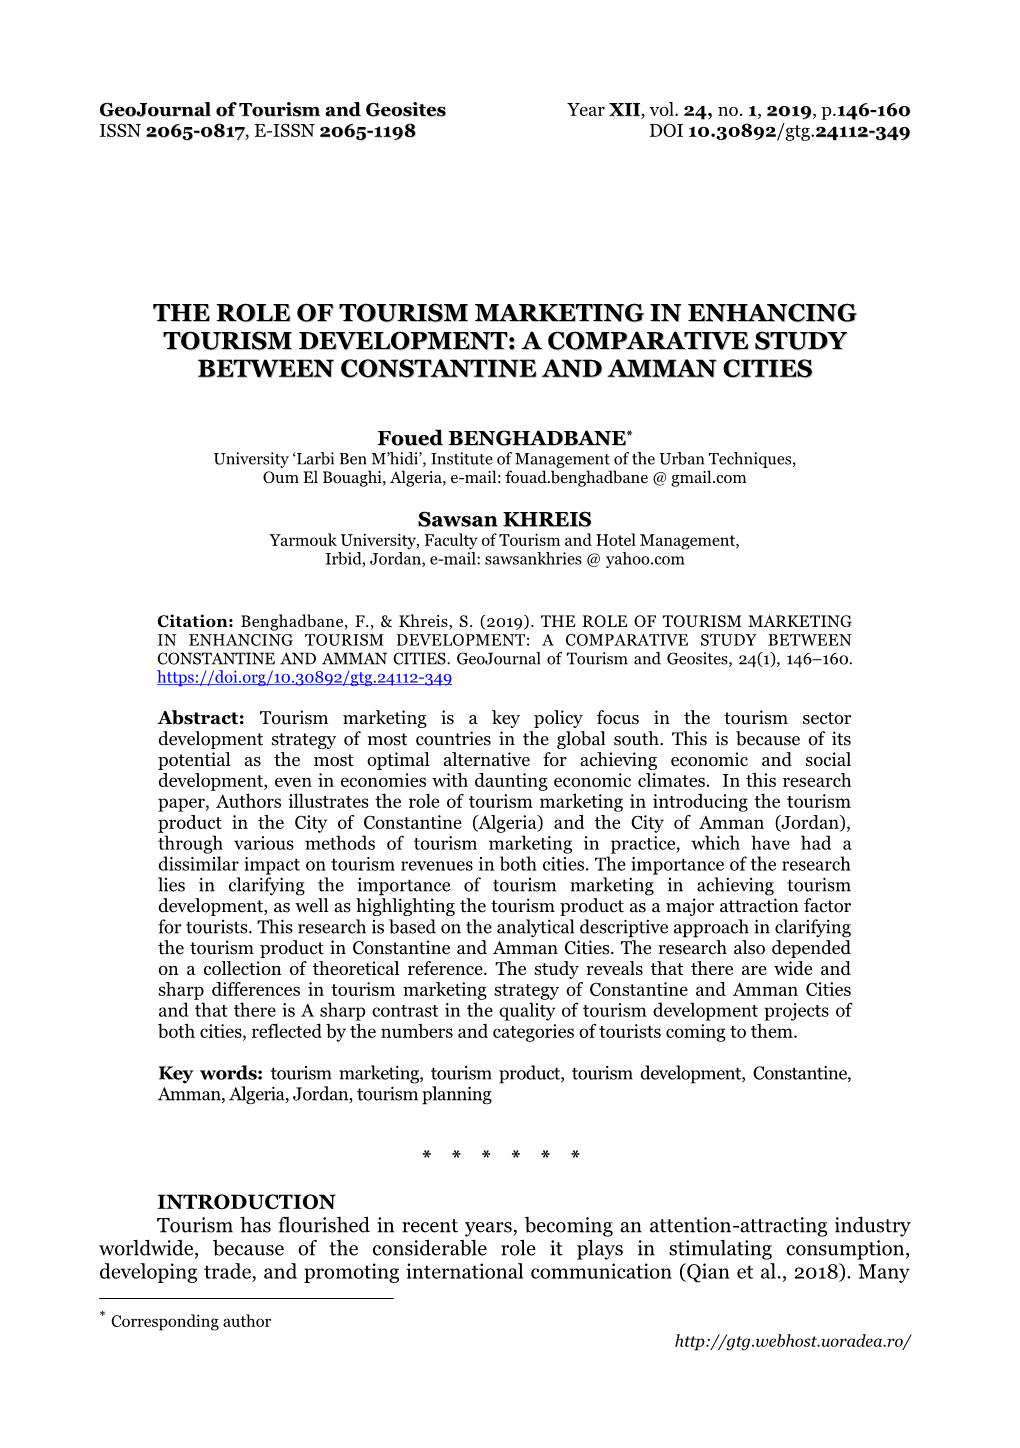 The Role of Tourism Marketing in Enhancing Tourism Development: a Comparative Study Between Constantine and Amman Cities